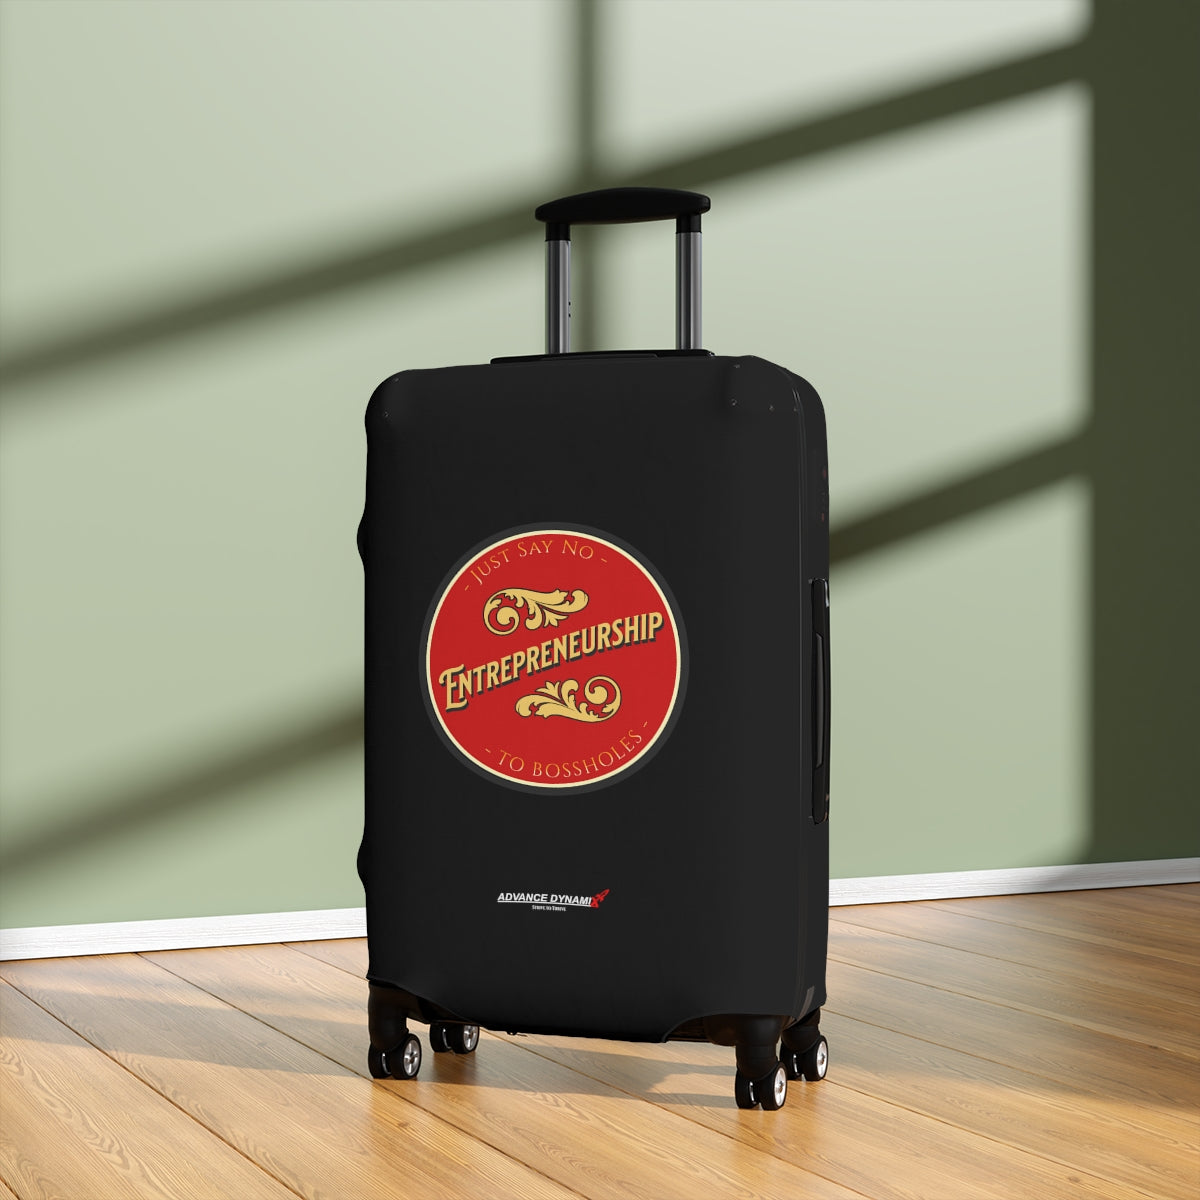 Entrepreneurship - Just say not to bossholes - Luggage Covers Infused with Advance Dynamix Add-A-Tude - Tell the world!